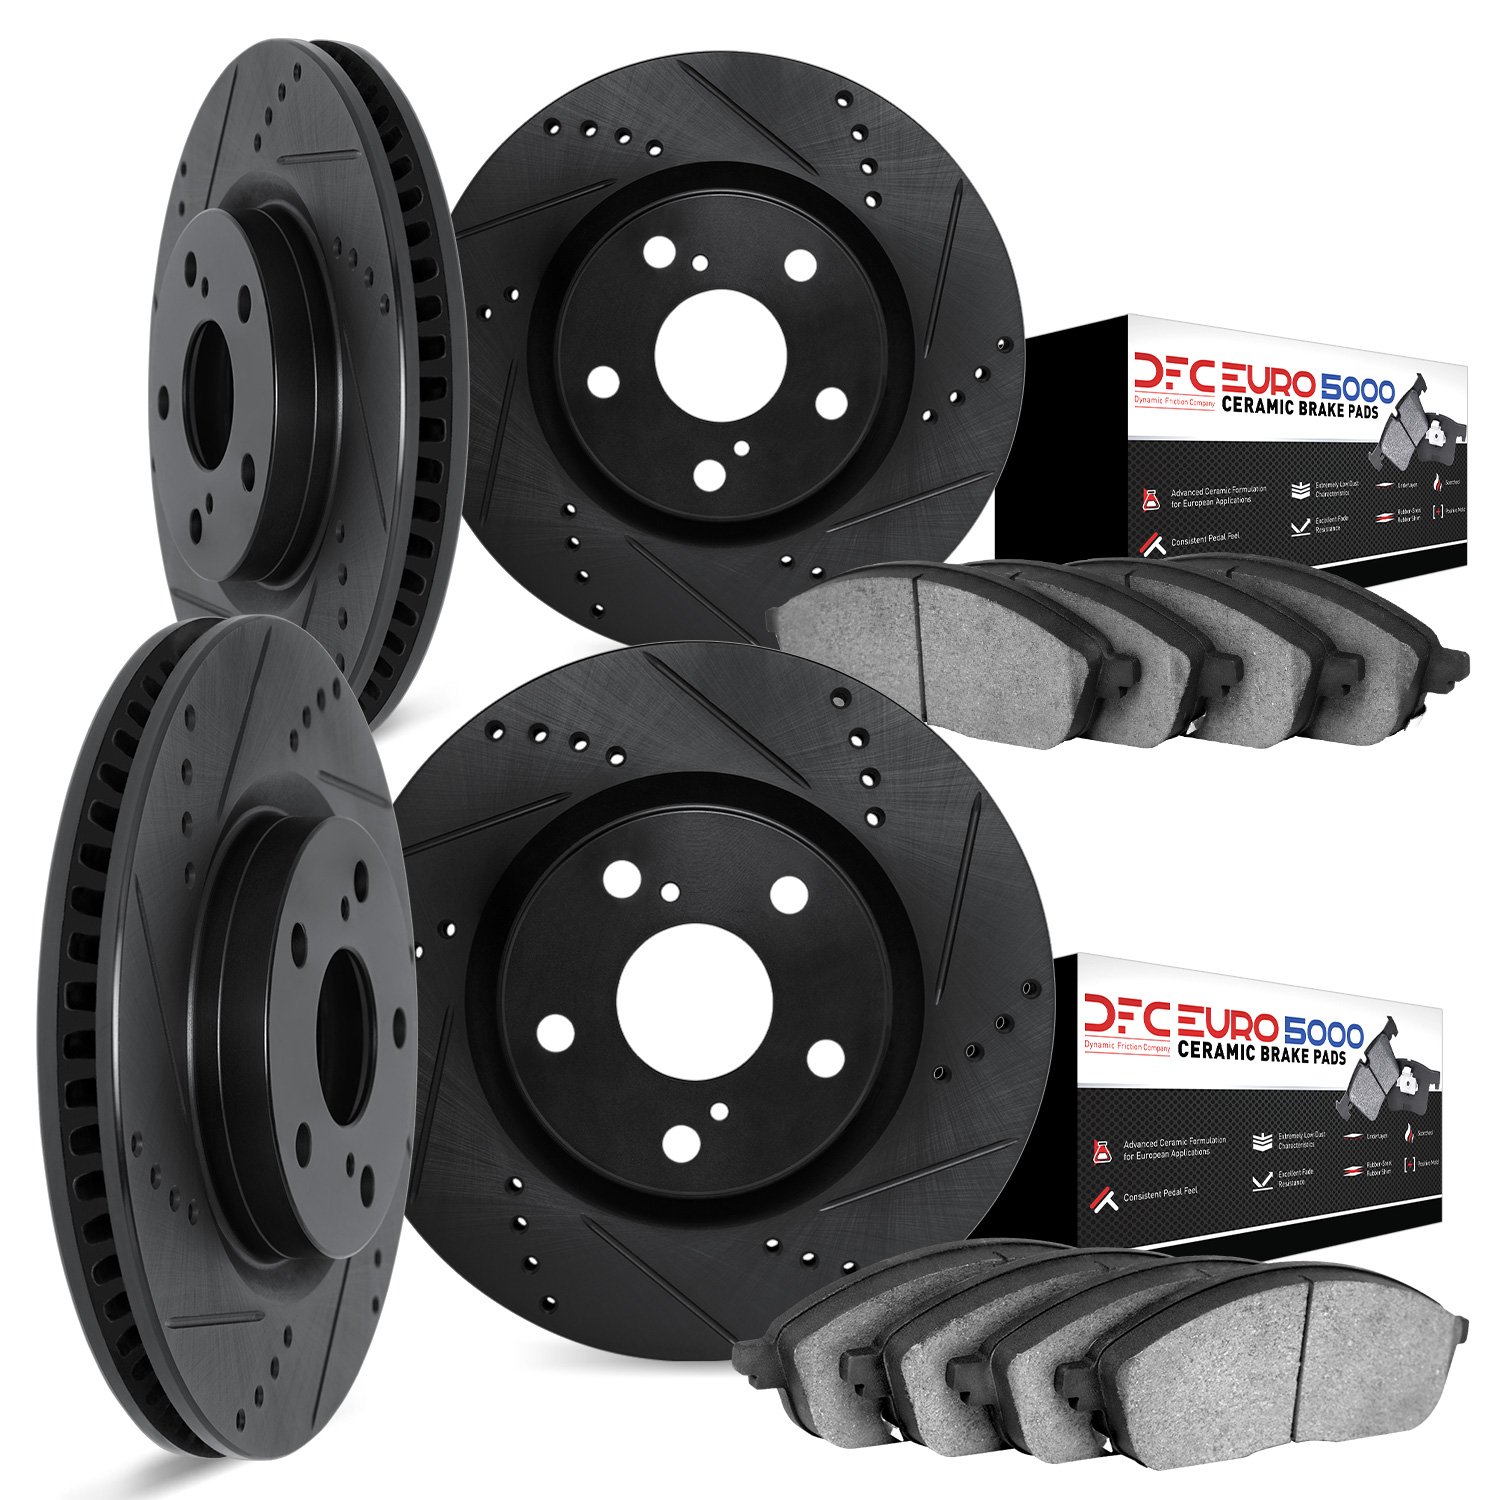 8604-31012 Drilled/Slotted Brake Rotors w/5000 Euro Ceramic Brake Pads Kit [Black], 1995-2002 BMW, Position: Front and Rear